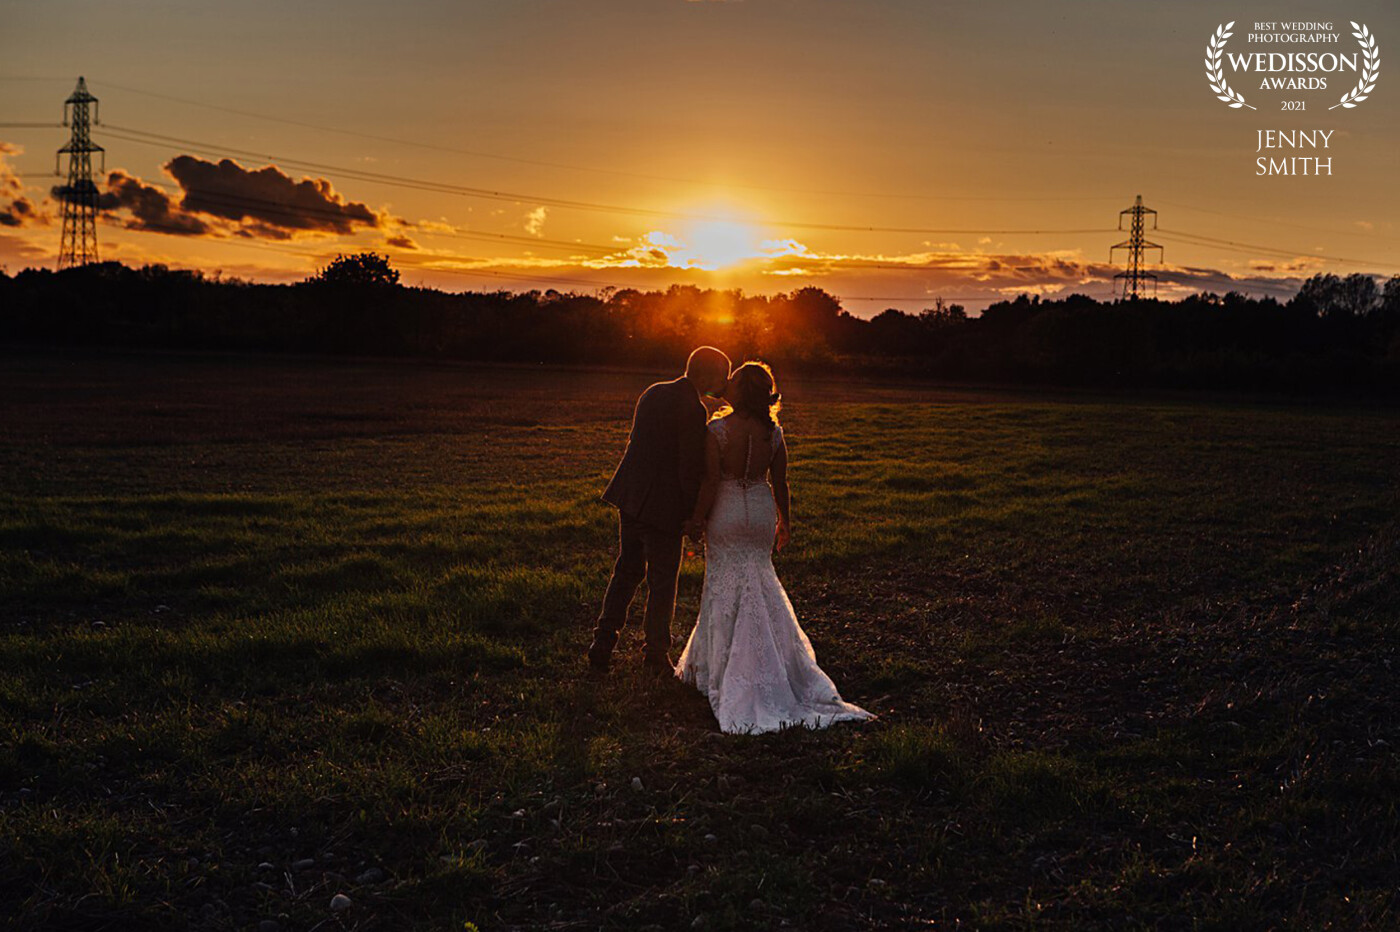 A glorious sunset in October! After having to rearrange their wedding and work with restrictions due to covid I was so glad that we had a beautiful sunny day to be able to capture photos of all the guests outside. This beautiful sunset was just spectacular and the icing on the cake for their wedding photos.